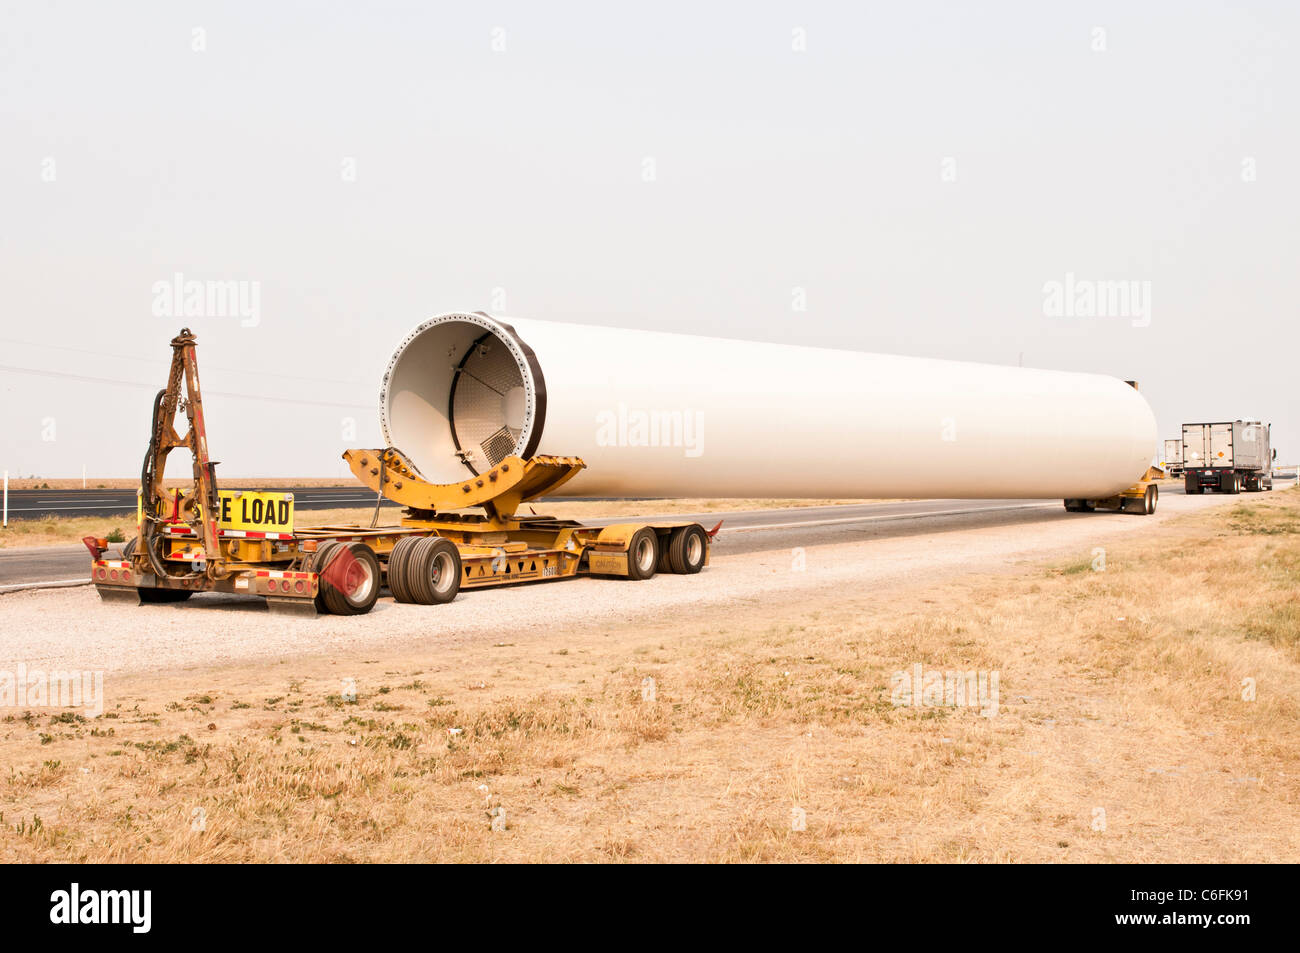 A tower section for a horizontal-axis wind turbine is delivered to a construction site near Amarillo, Texas. Stock Photo